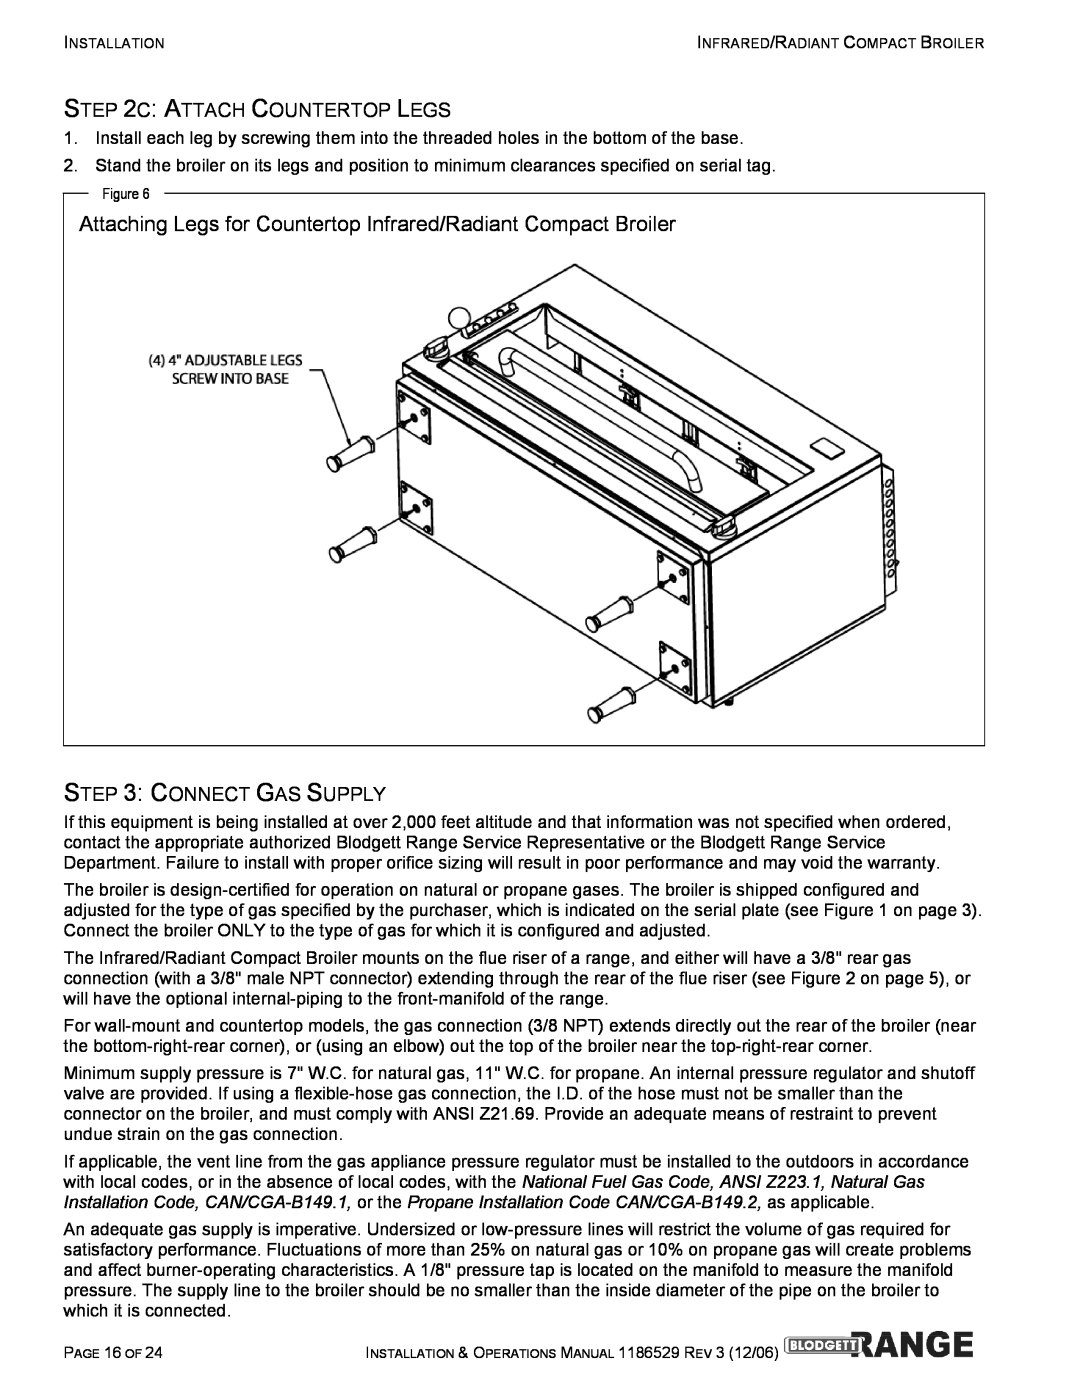 Blodgett B48-RAD, B48-NFR, B36-RAD Attaching Legs for Countertop Infrared/Radiant Compact Broiler, C Attach Countertop Legs 